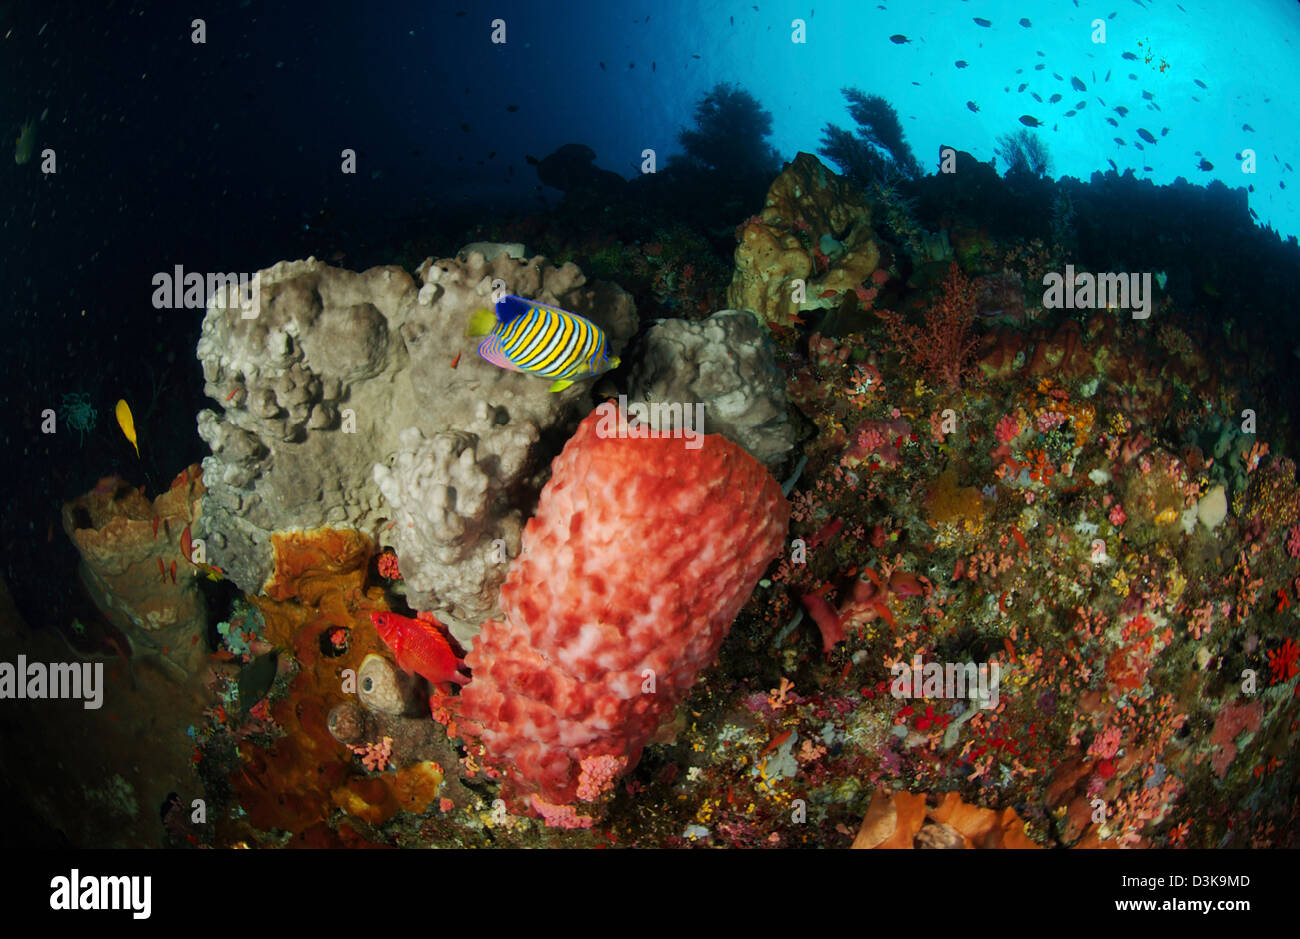 Colorful sea wall with regal angelfish (Pygoplites diacanthus) and grey and pink barrel sponges, North Sulawesi, Indonesia. Stock Photo